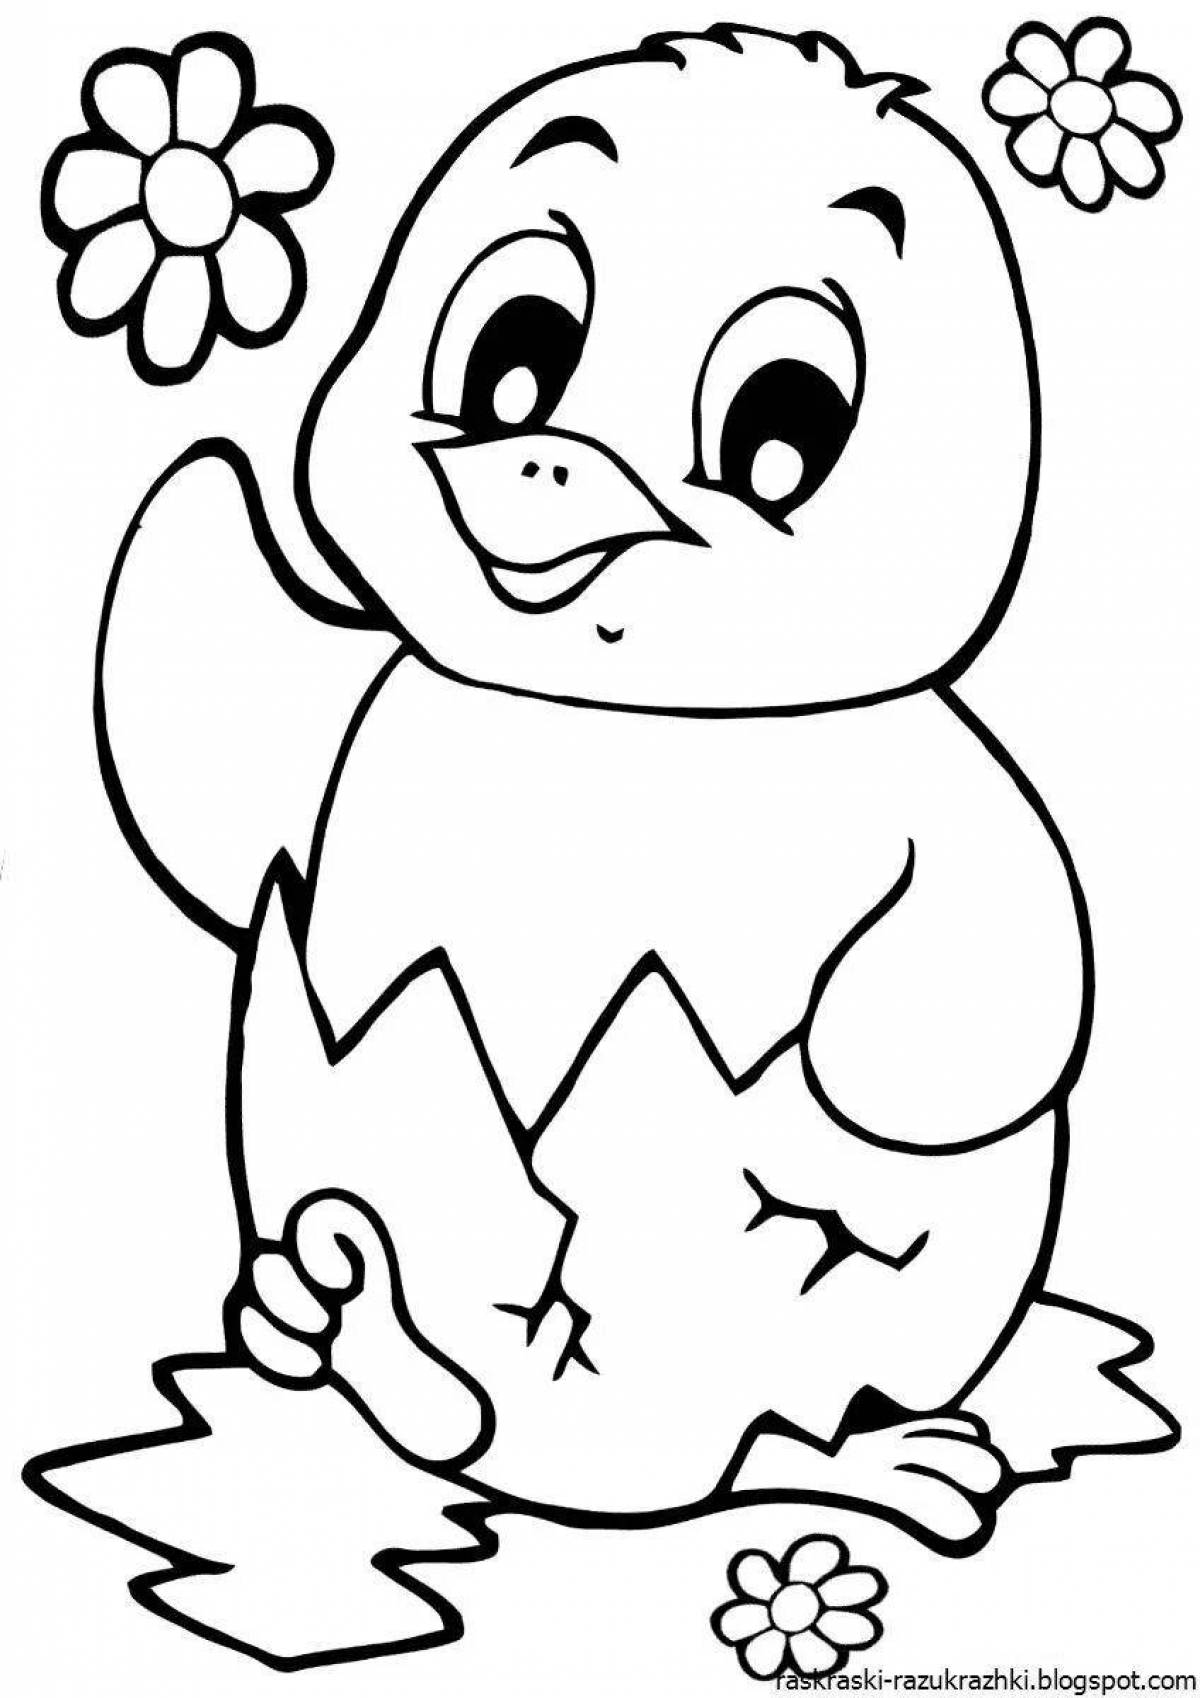 Colorful chick coloring page for kids